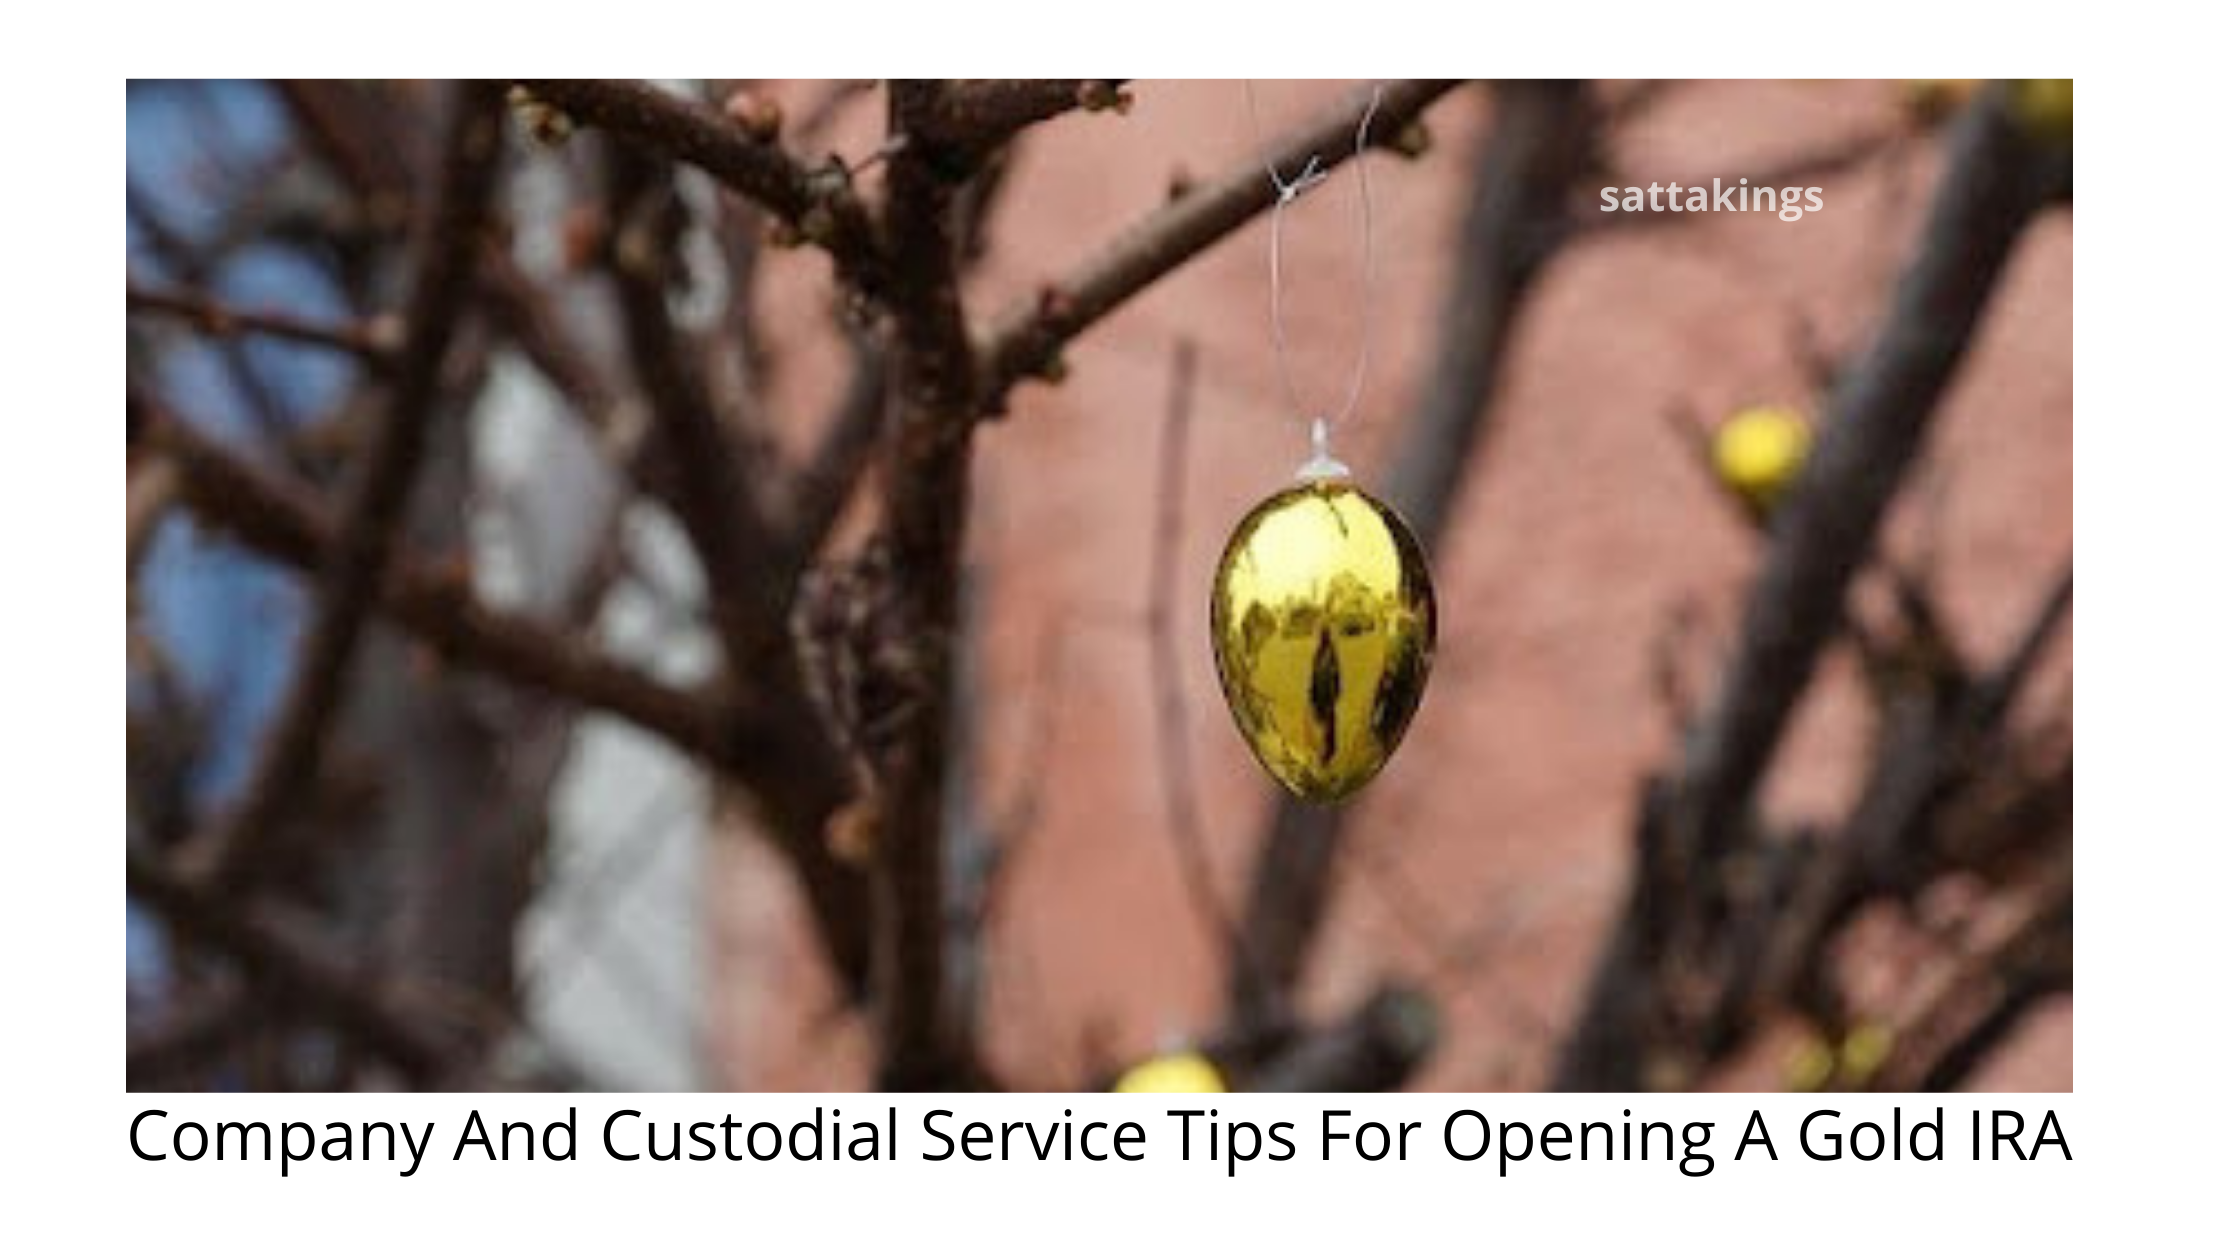 Company And Custodial Service Tips For Opening A Gold IRA 